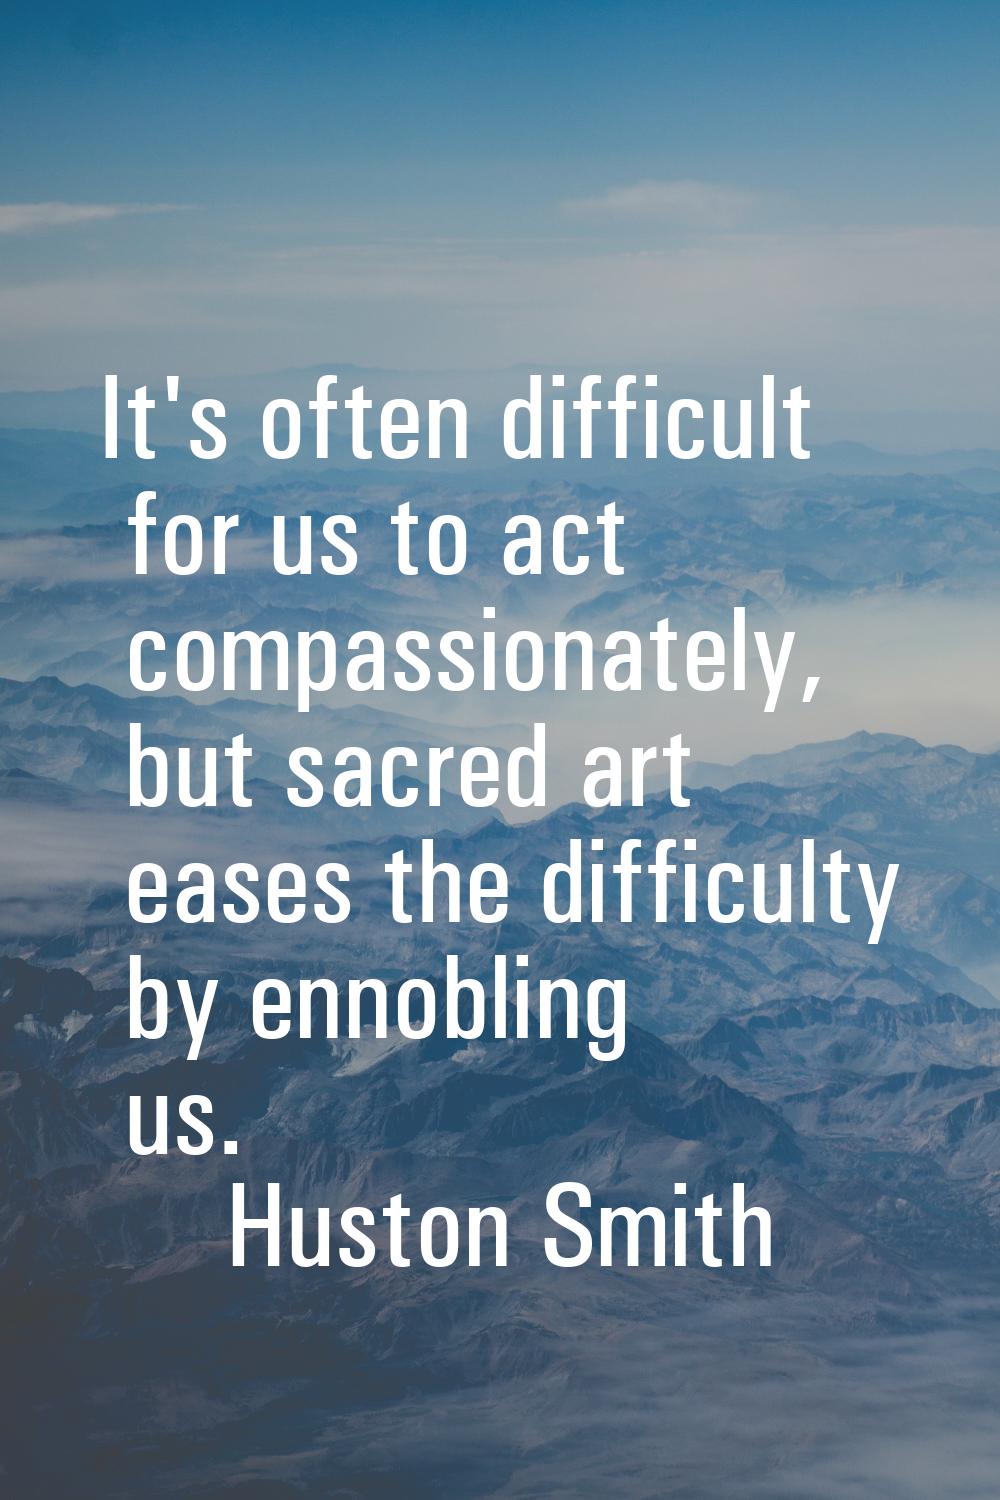 It's often difficult for us to act compassionately, but sacred art eases the difficulty by ennoblin